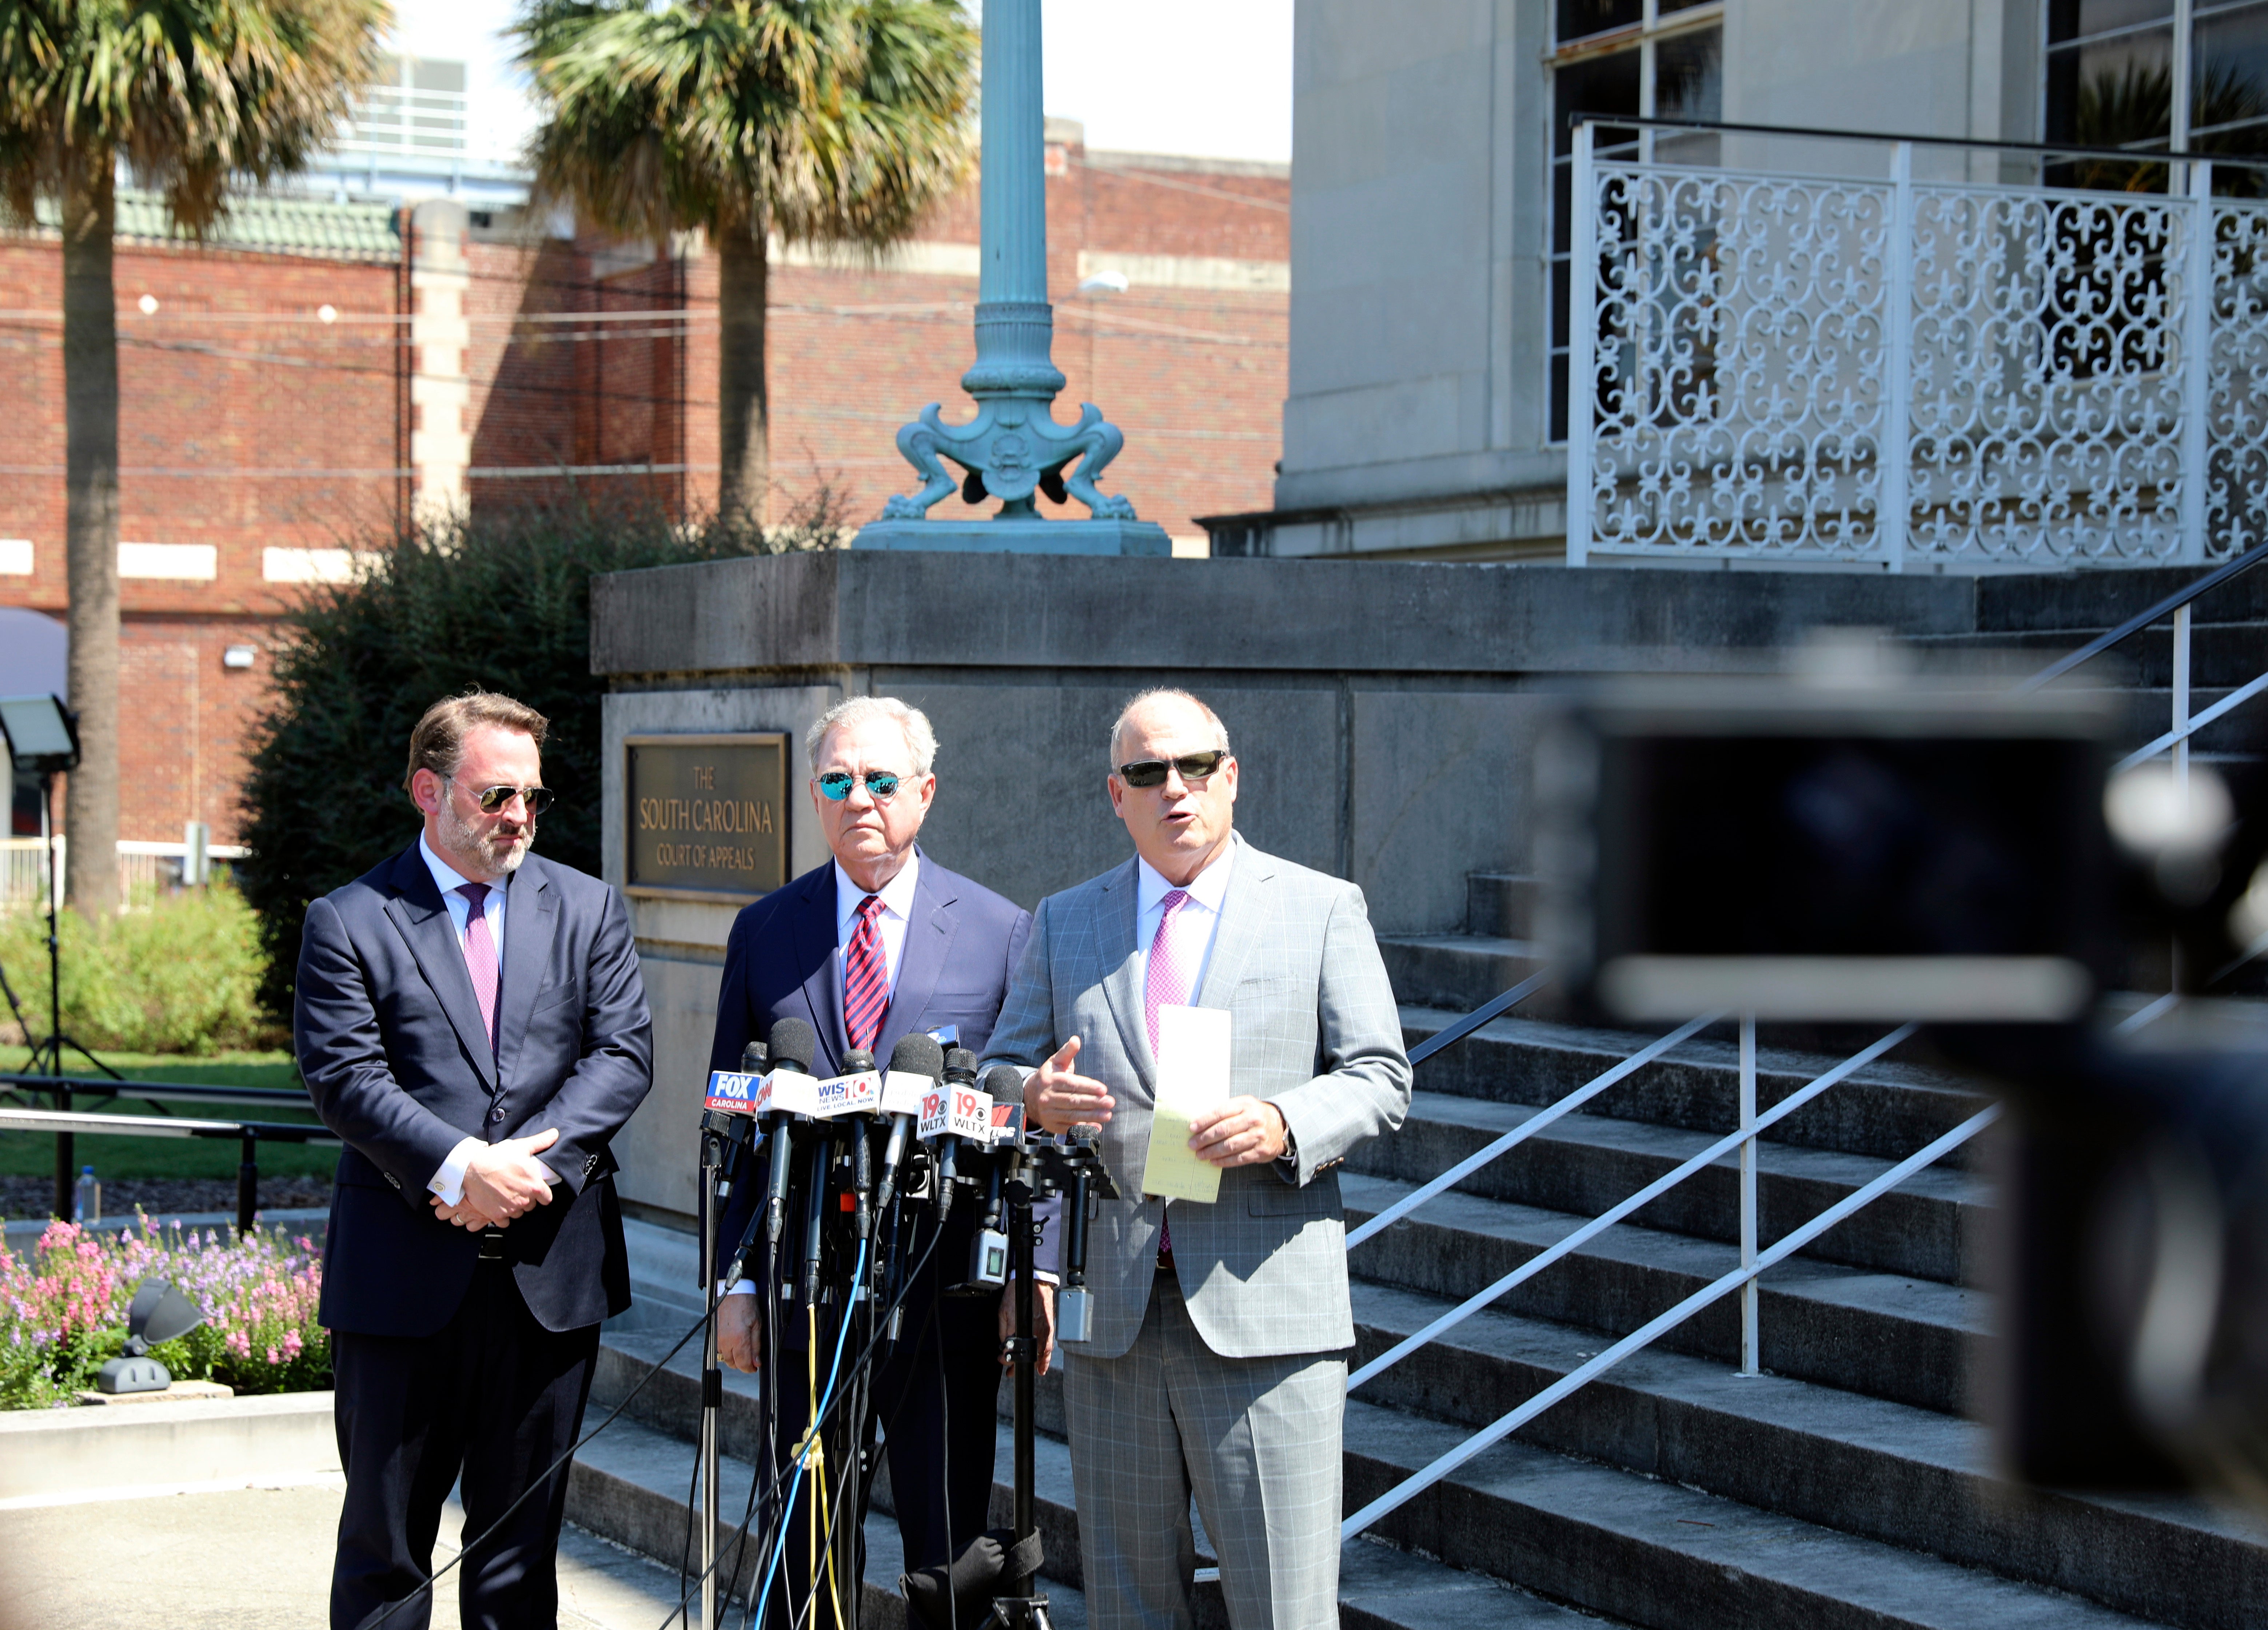 Alex Murdaugh’s attorneys Dick Harpootlian and Jim Griffin speak at a news conference after filing a motion requesting a new trial for their client